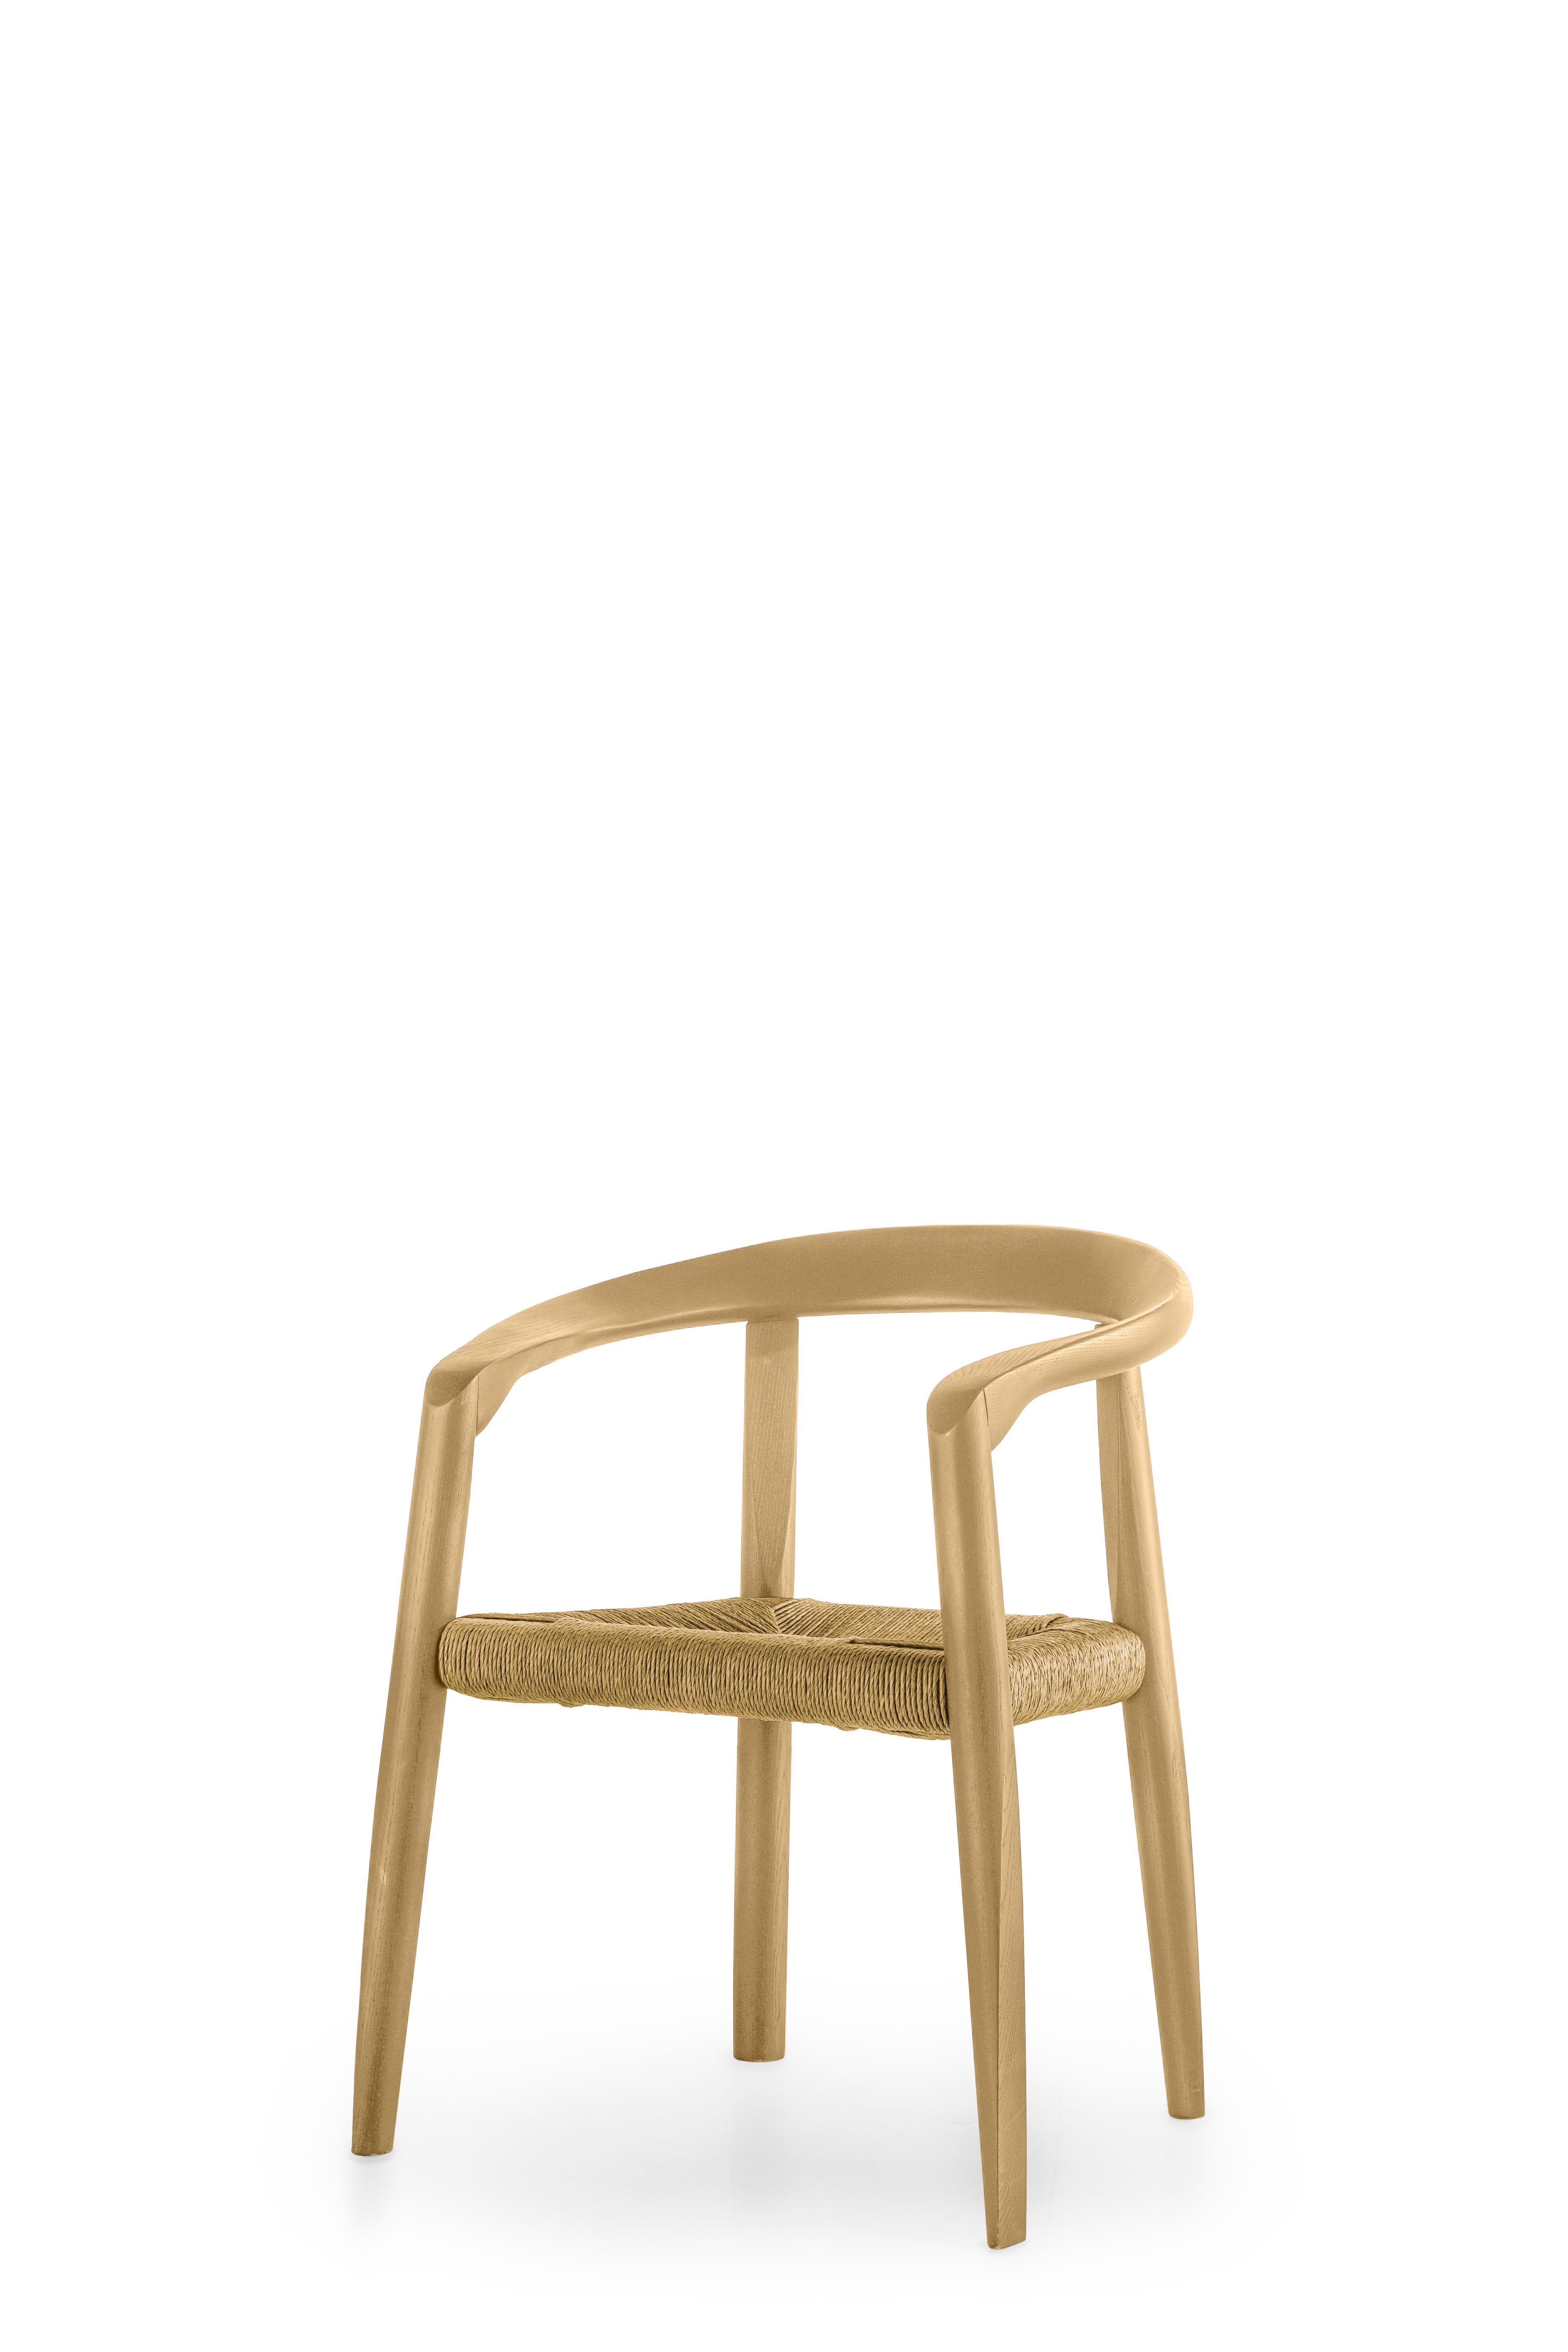 For Sale: Beige (EC_ecru) Natural Ashwood and Papercord Chair Molteni&C by Tobia Scarpa - made in Italy 2